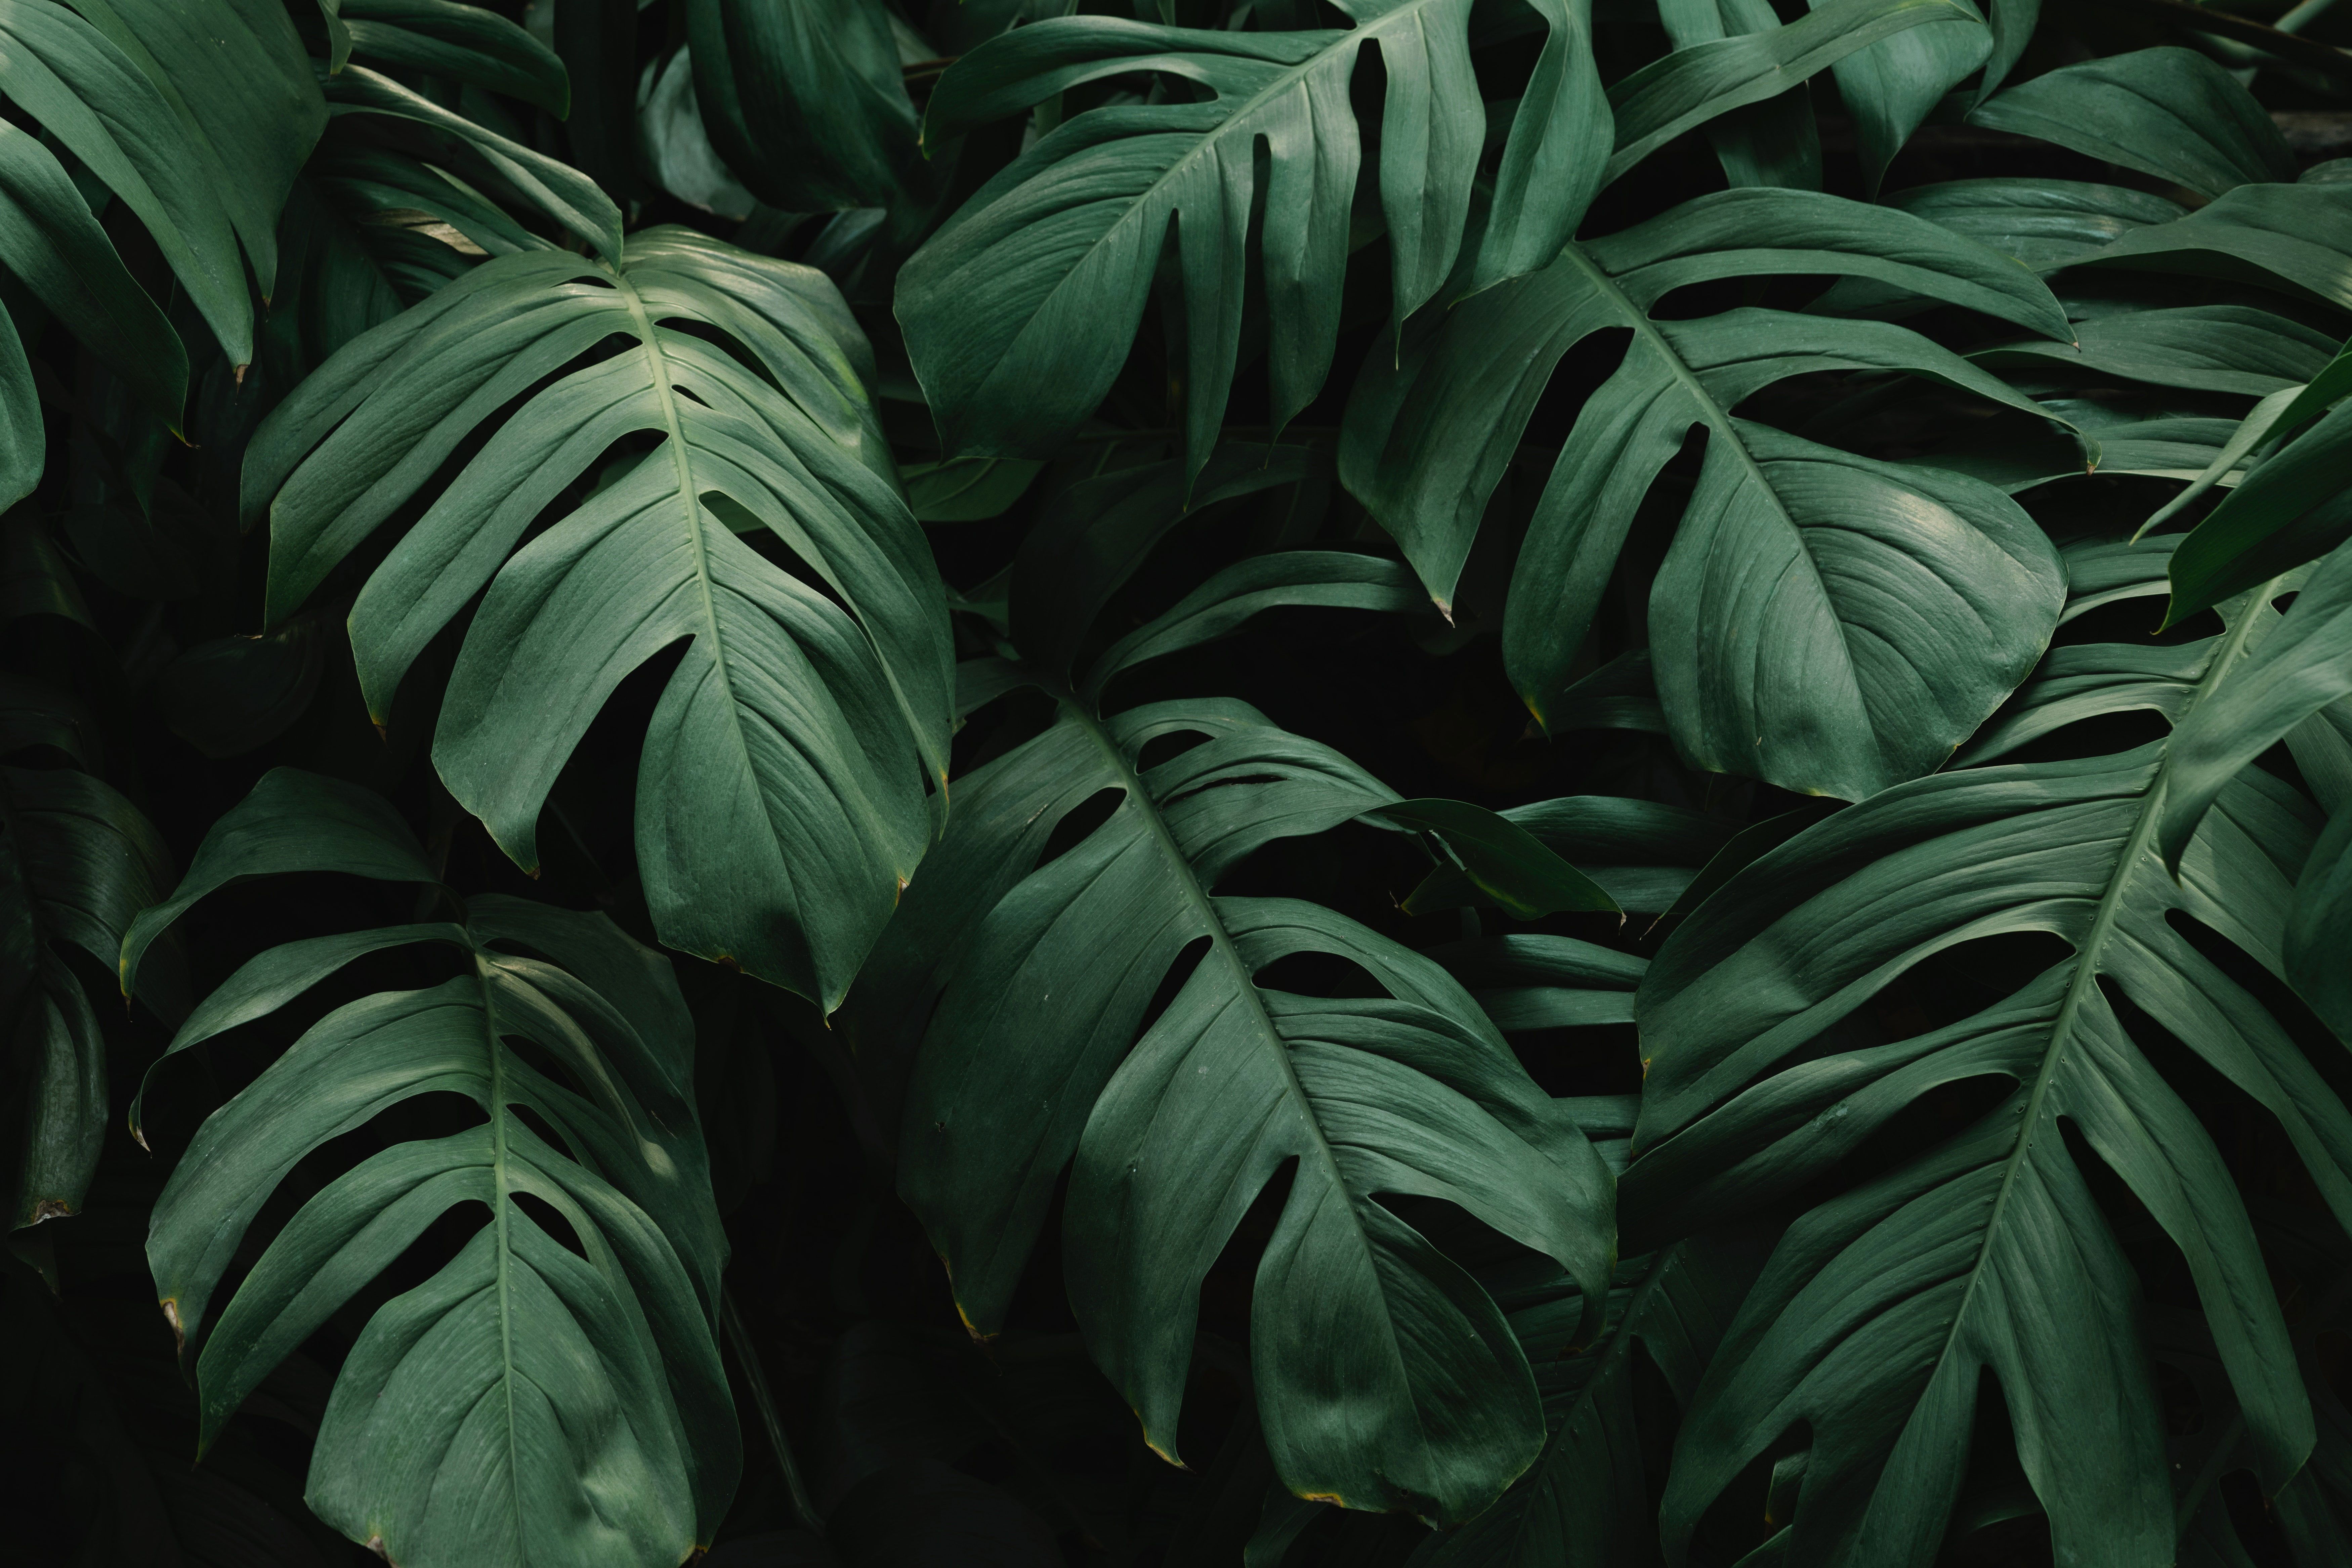 A close up of some green leaves - Leaves, Monstera, jungle